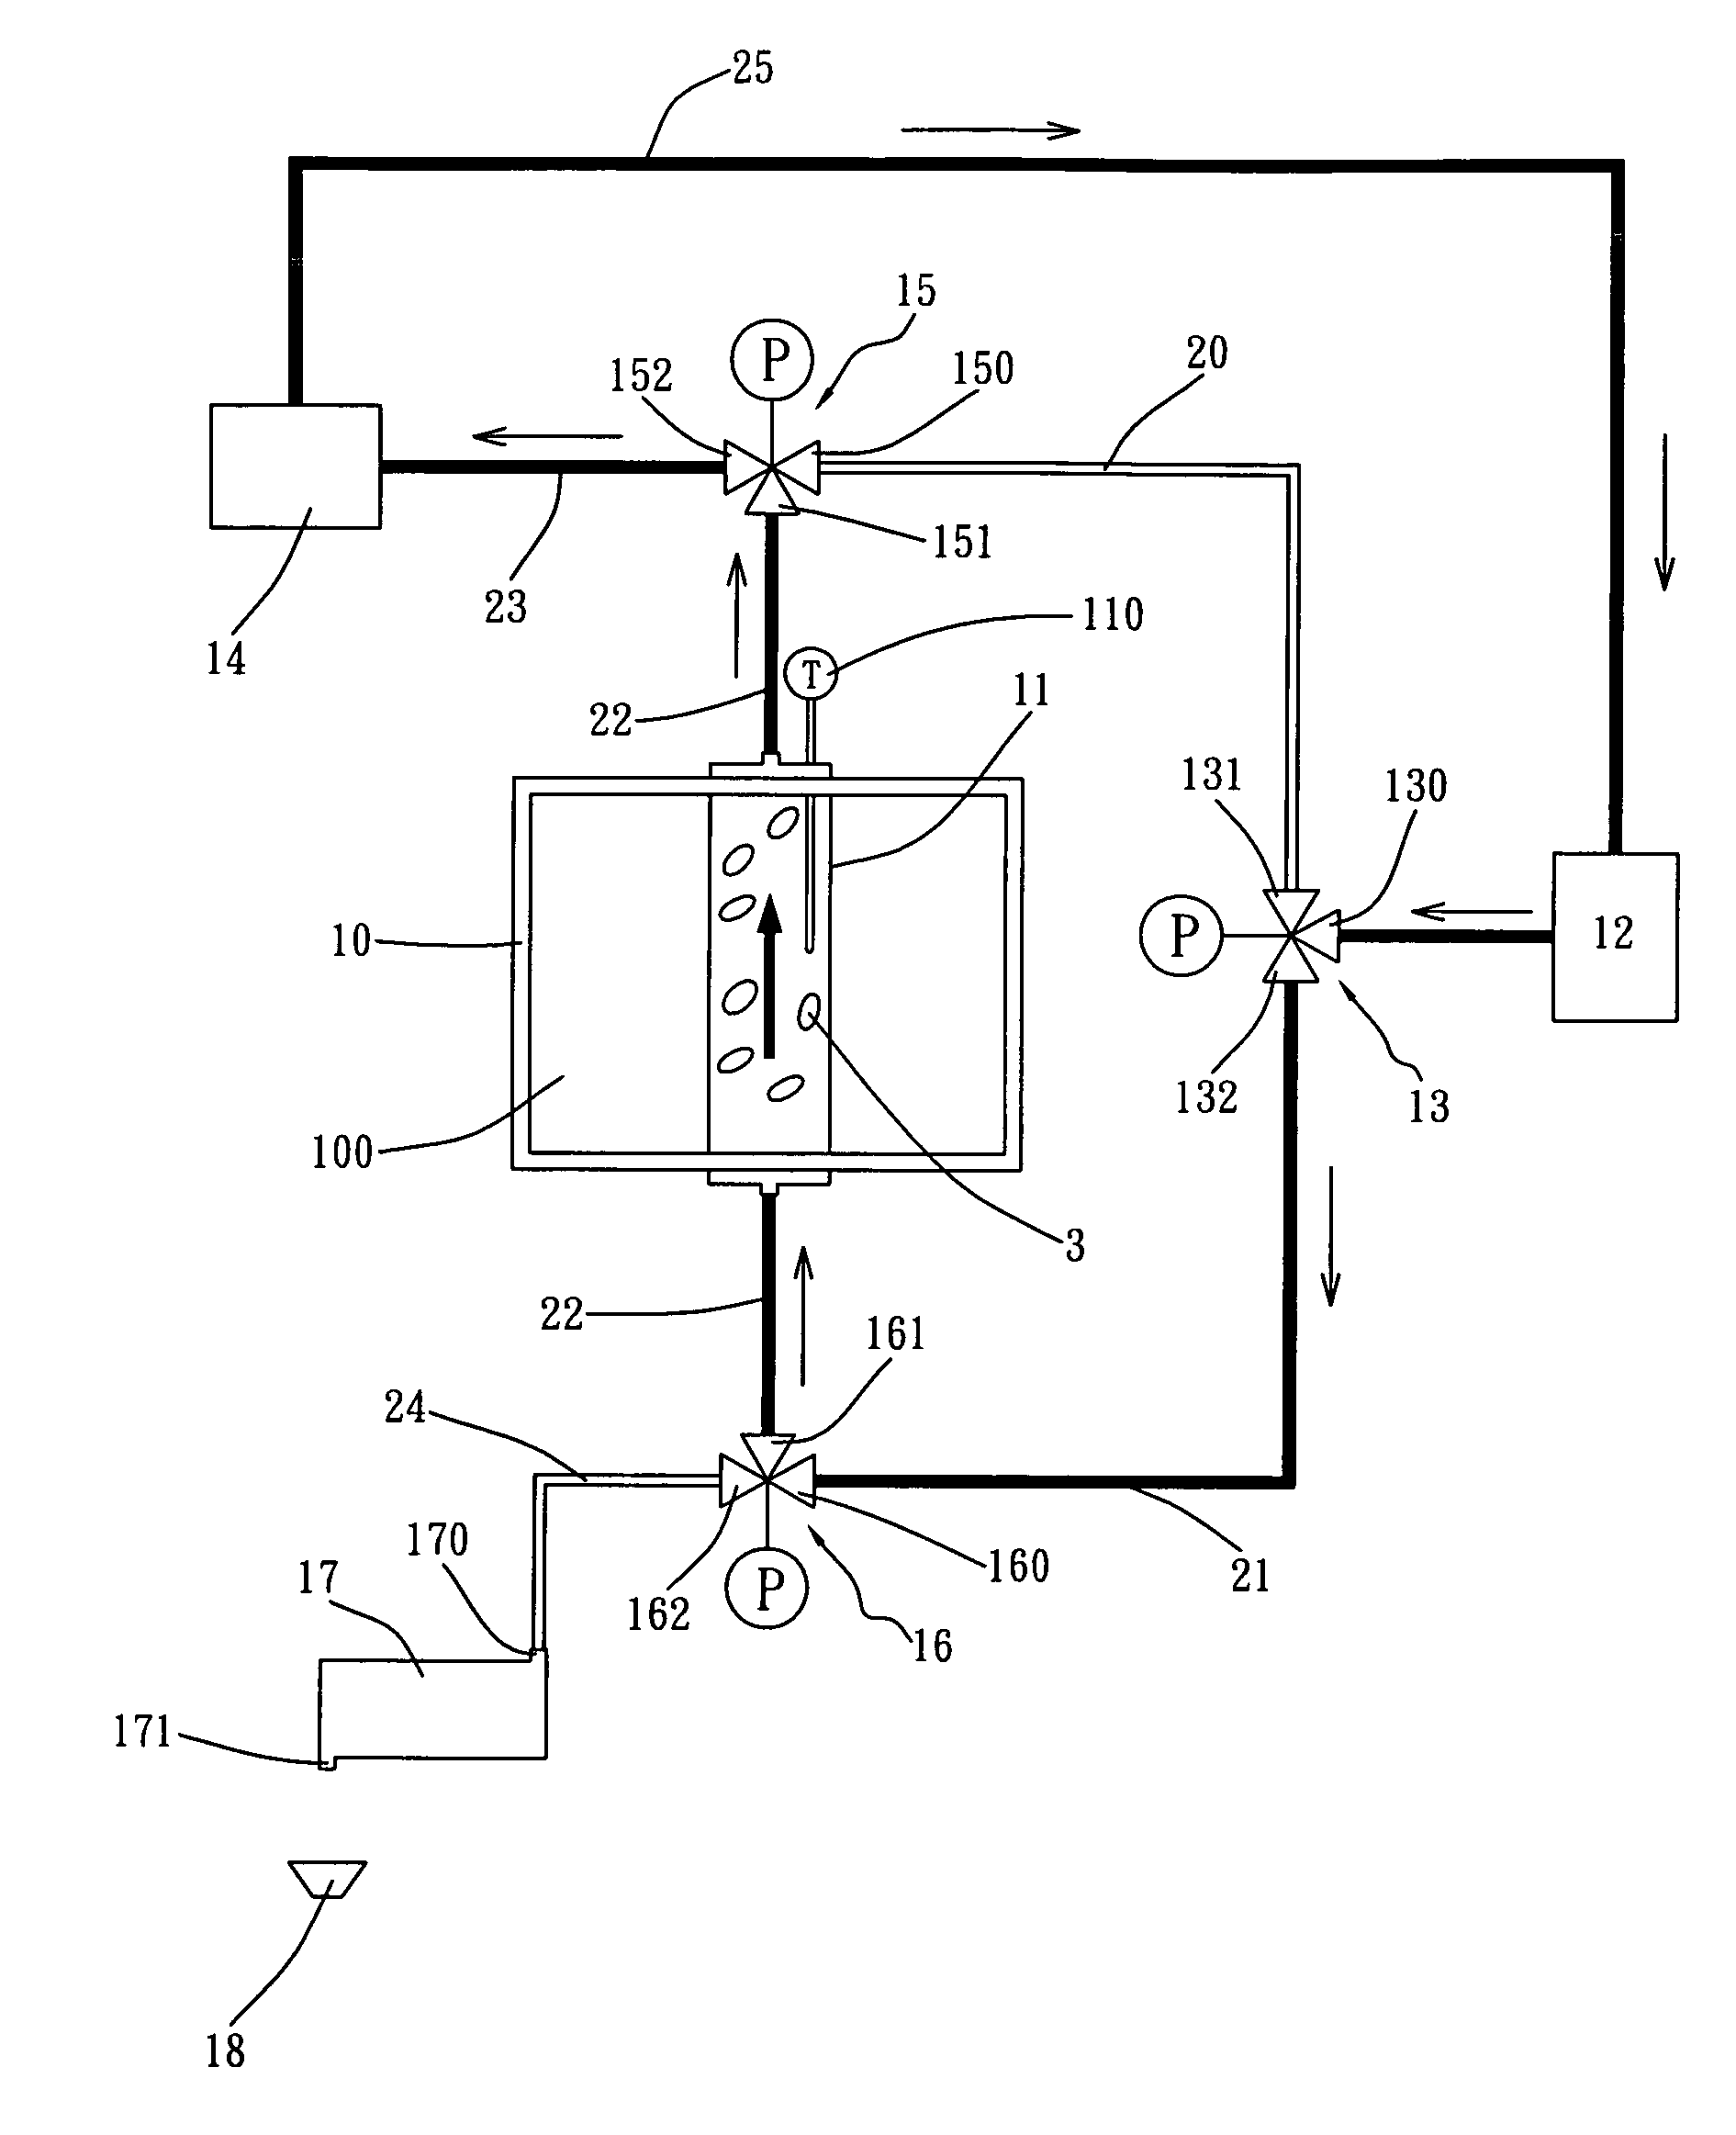 Extraction apparatus and method of extracting essential oils, essence, and pigments from odorous raw material by microwave heating under sub-critical conditions